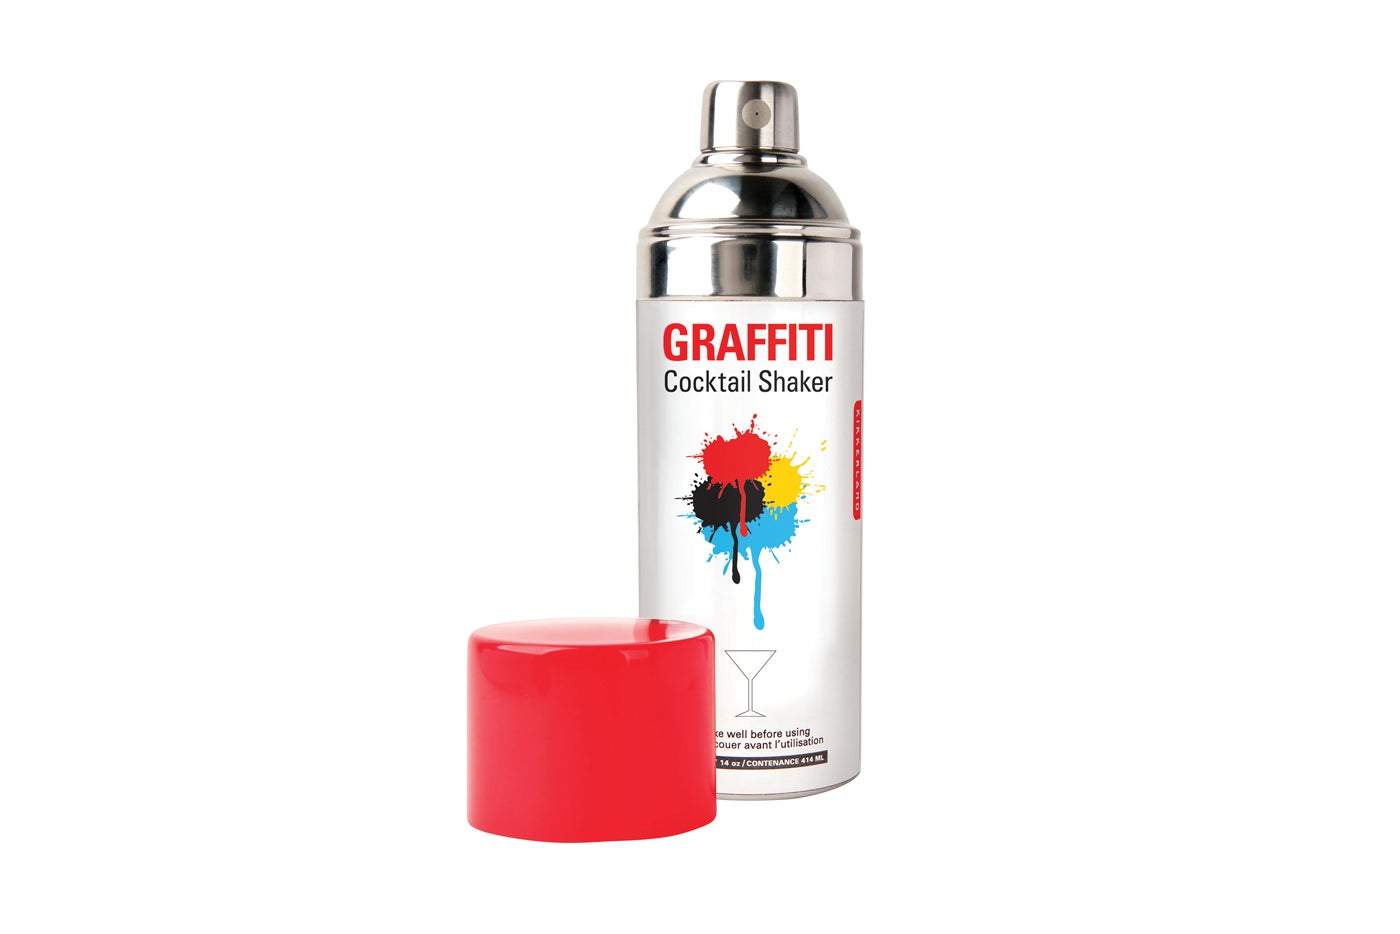 Would You Decorate Your Home With Graffiti?